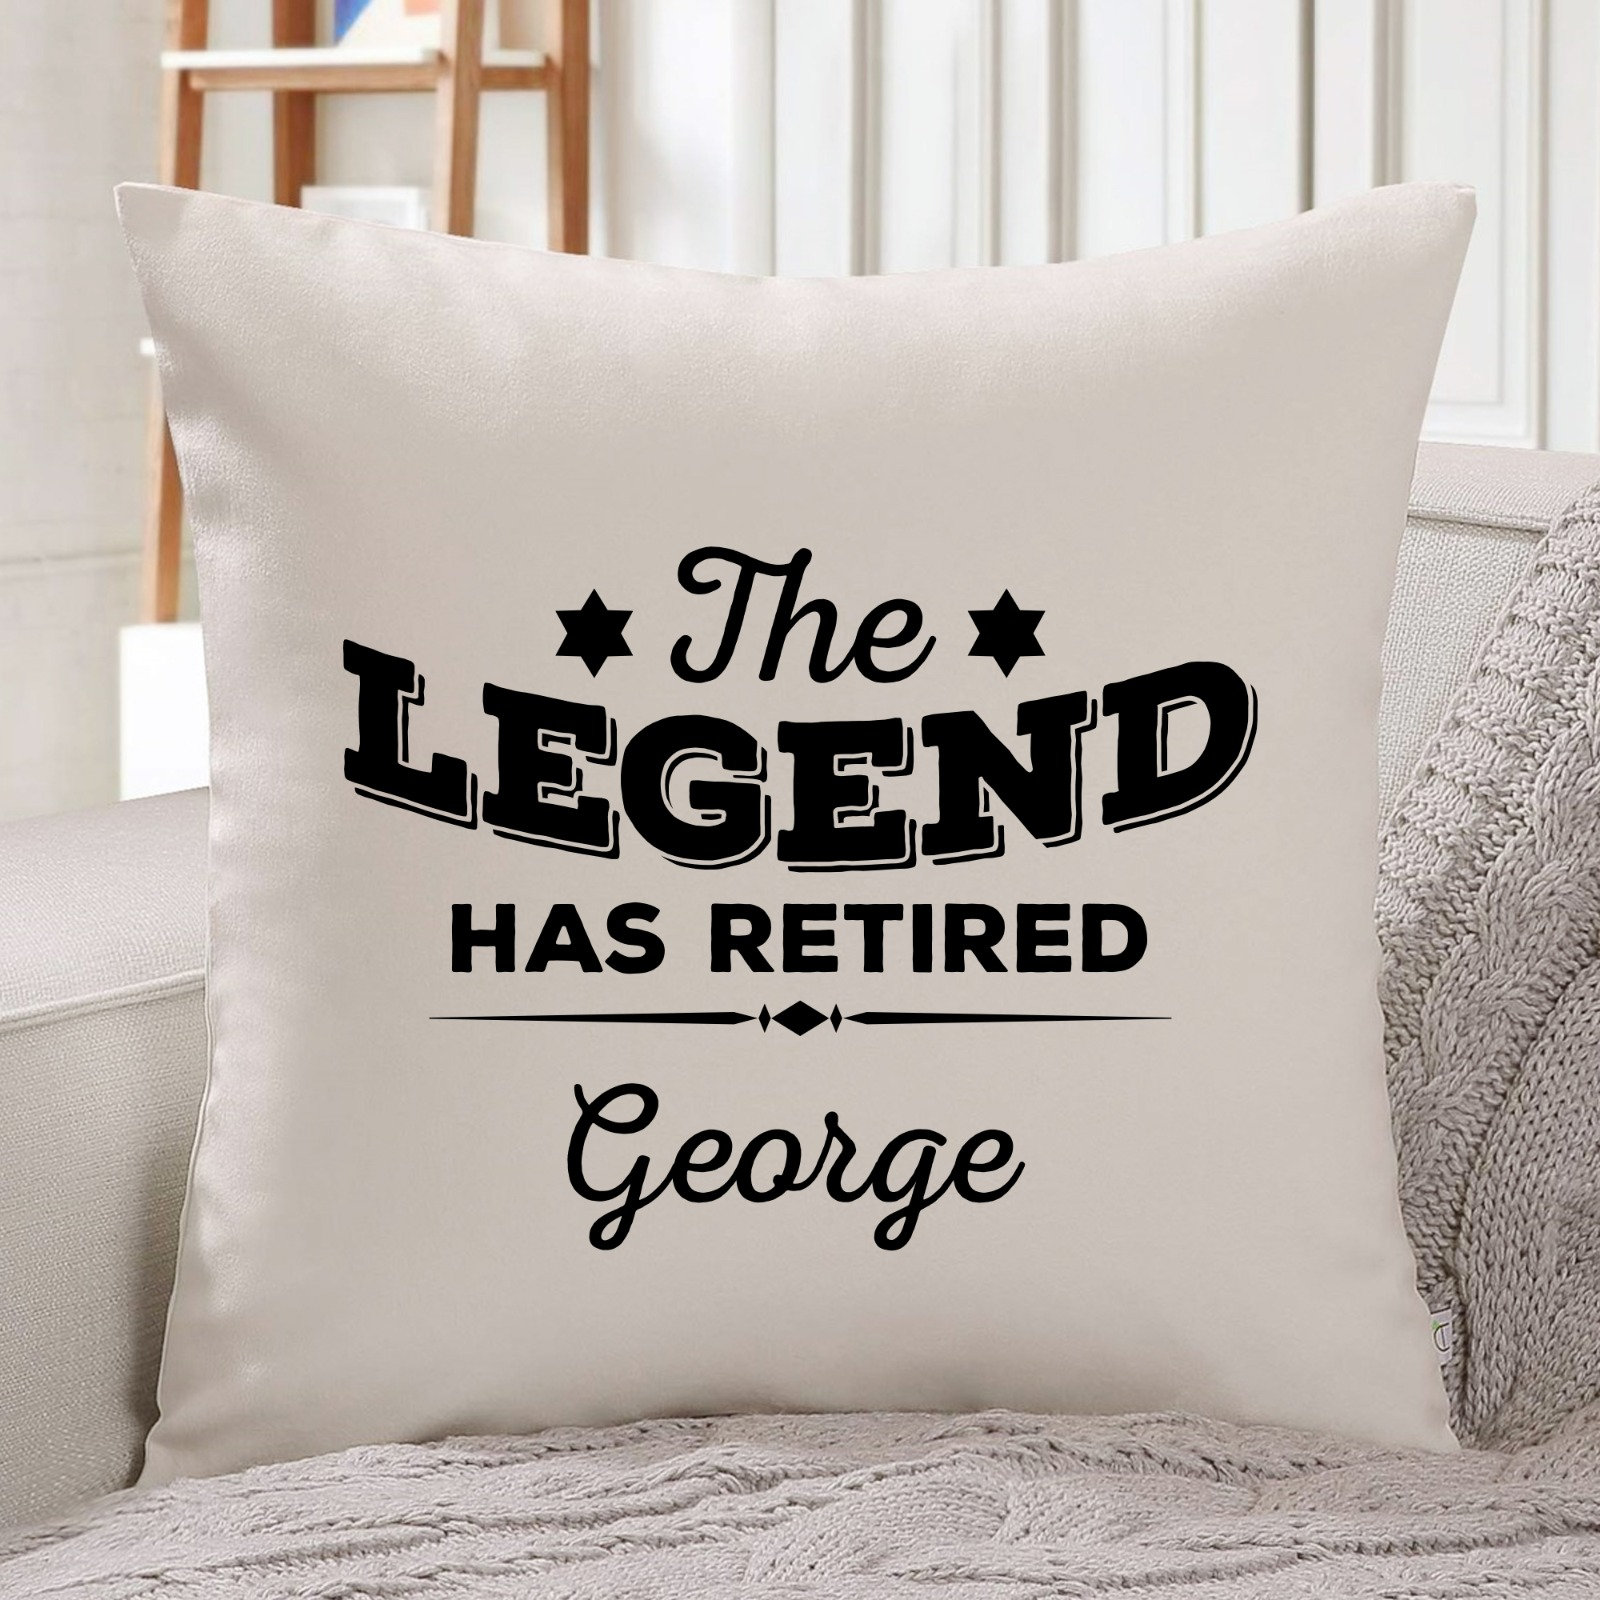 Personalized Pillow Case for The Legendary Teacher 